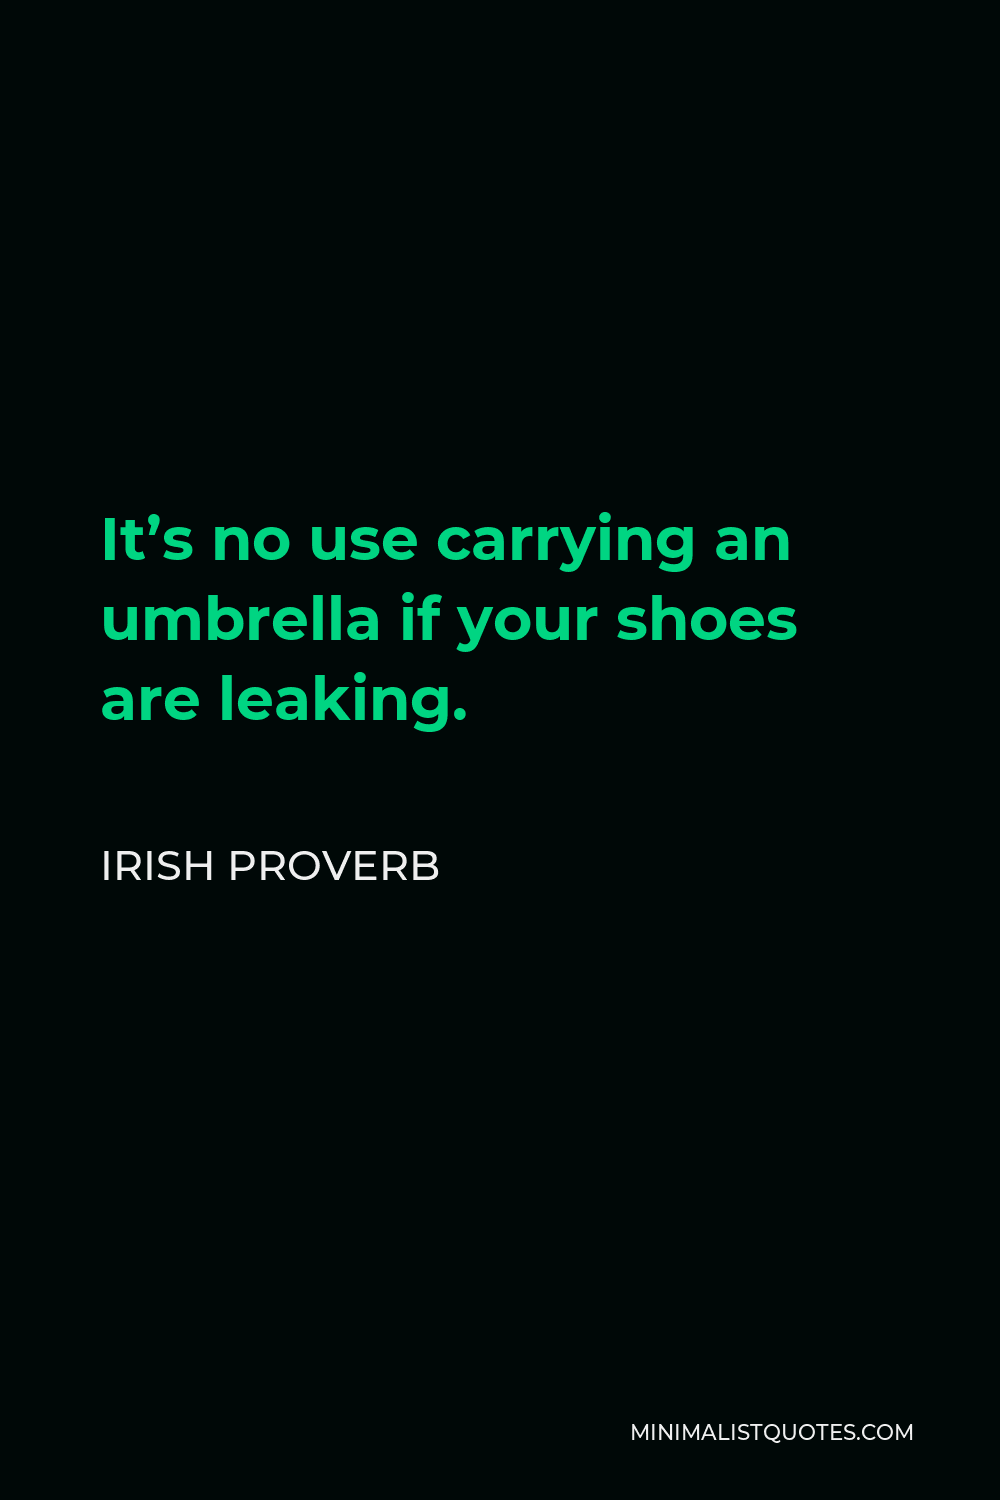 Irish Proverb Quote - It’s no use carrying an umbrella if your shoes are leaking.